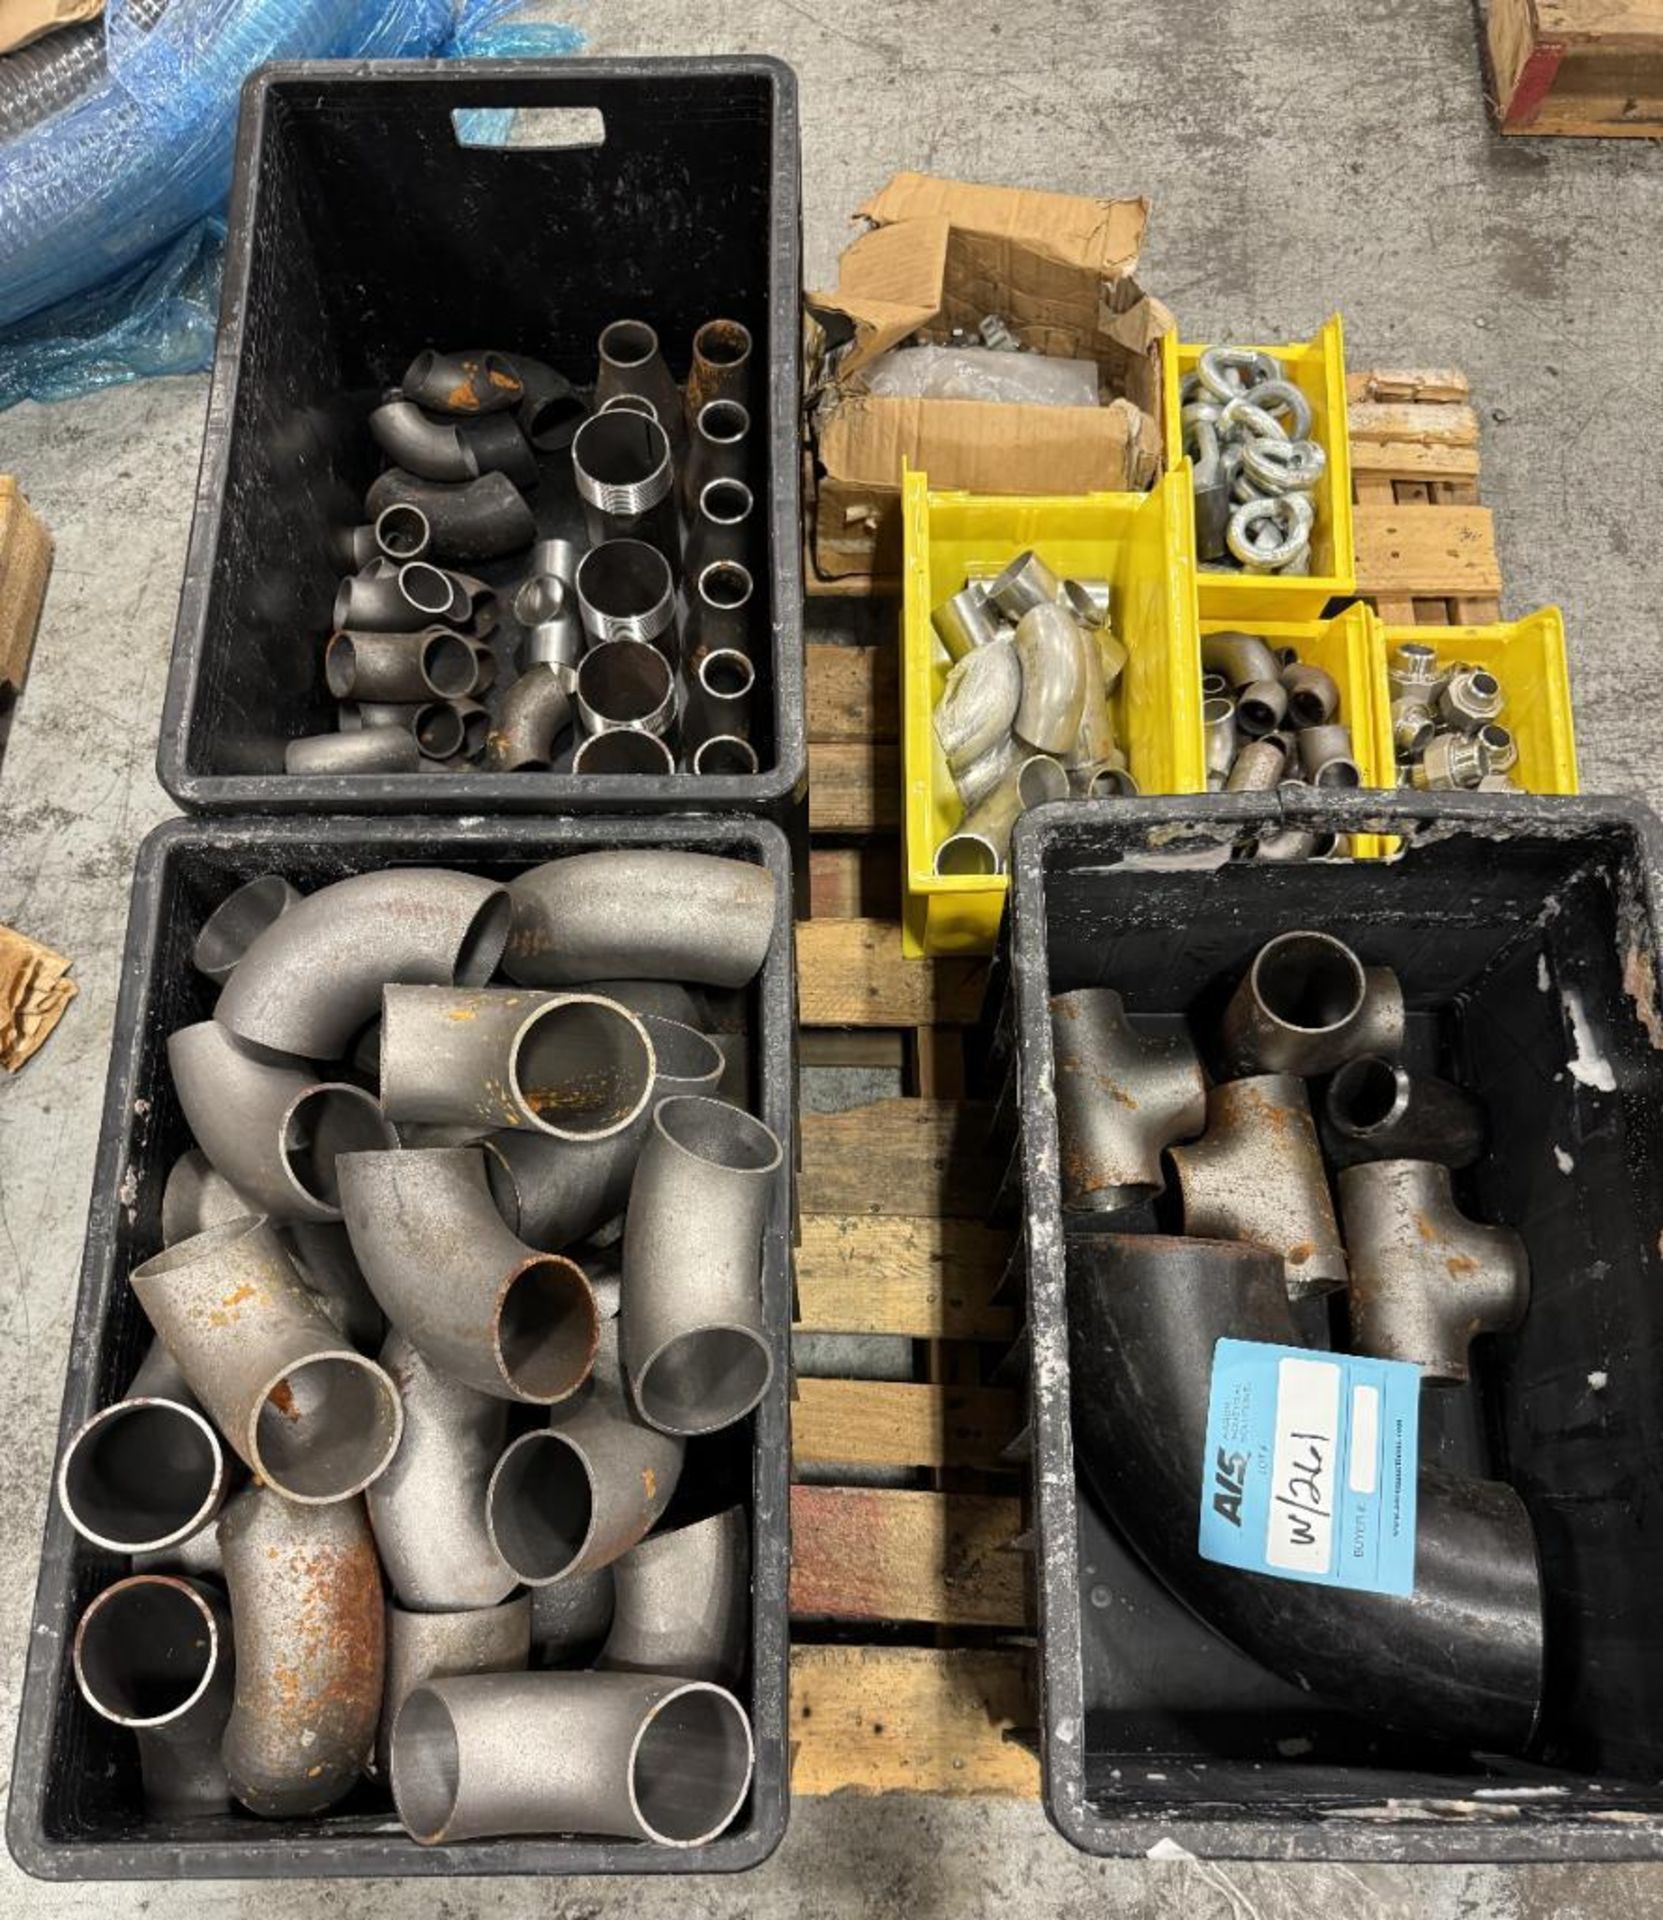 Lot Consisting Of: Spool of wire, pipe hangers, pipe fittings, hose, butterfly valves. - Image 7 of 15